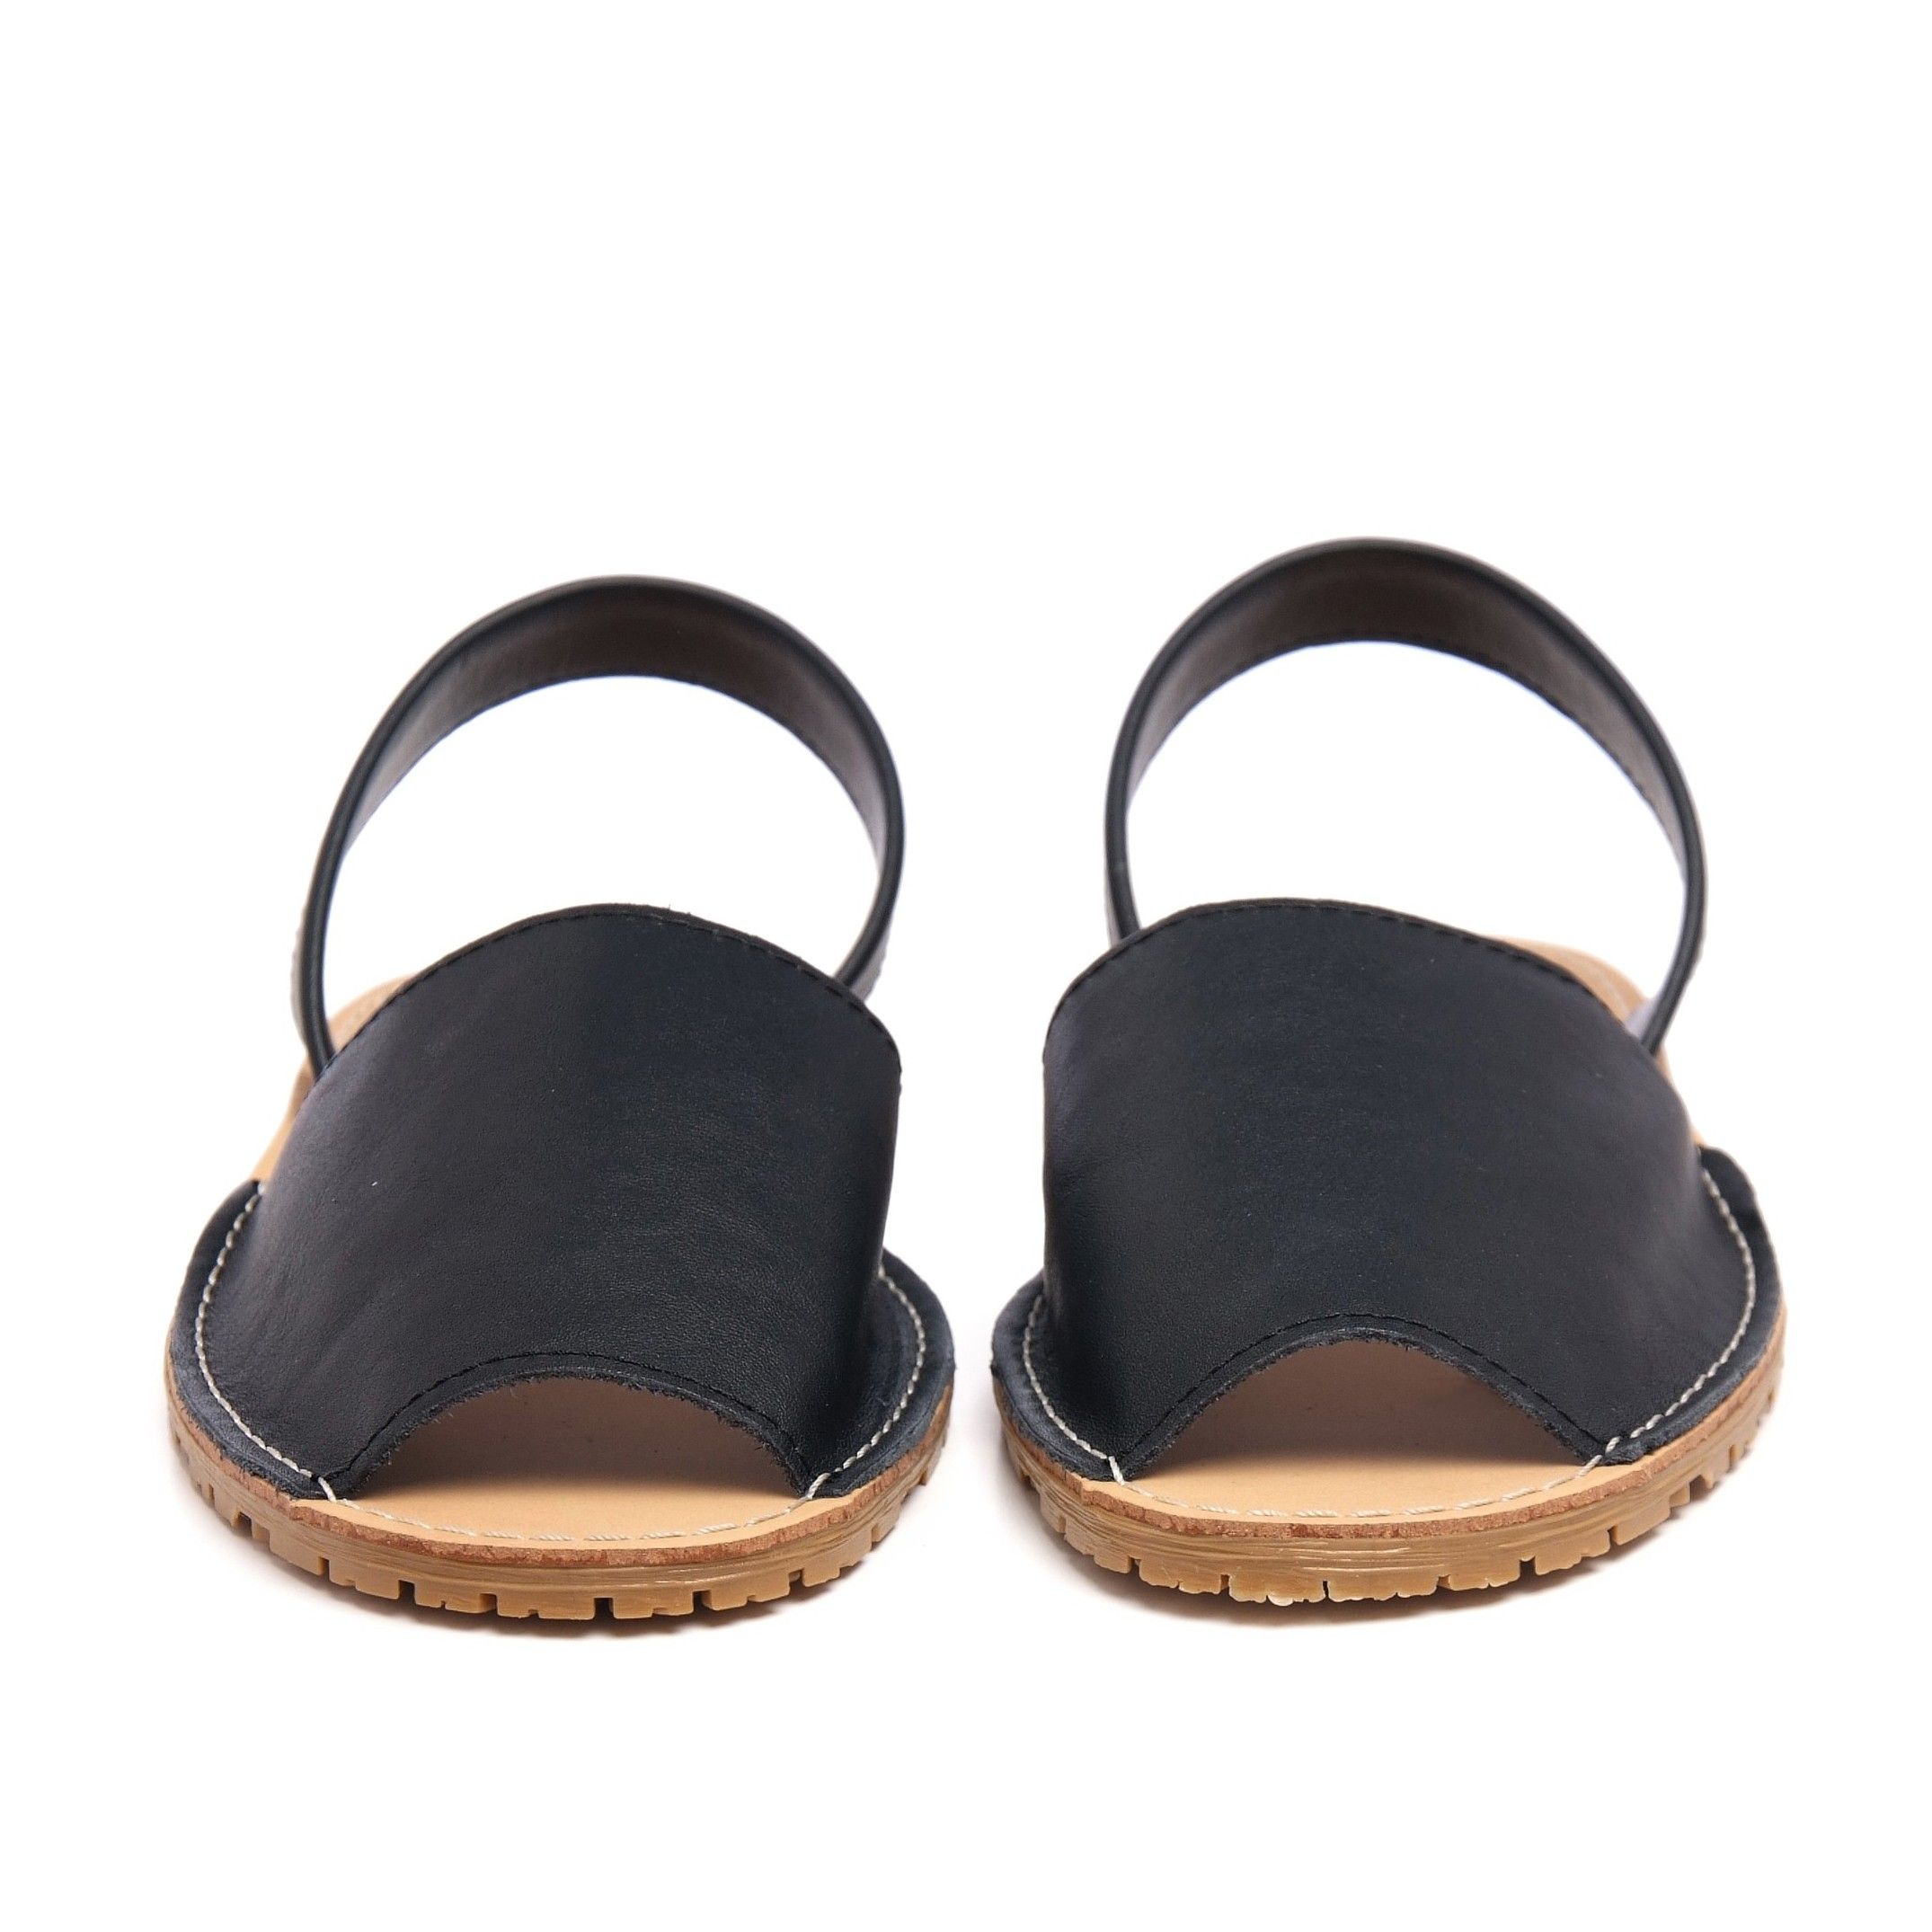 Classic leather sandal Menorquina. Upper and inner: leather. Sole: anti-slip rubber. MADE IN SPAIN